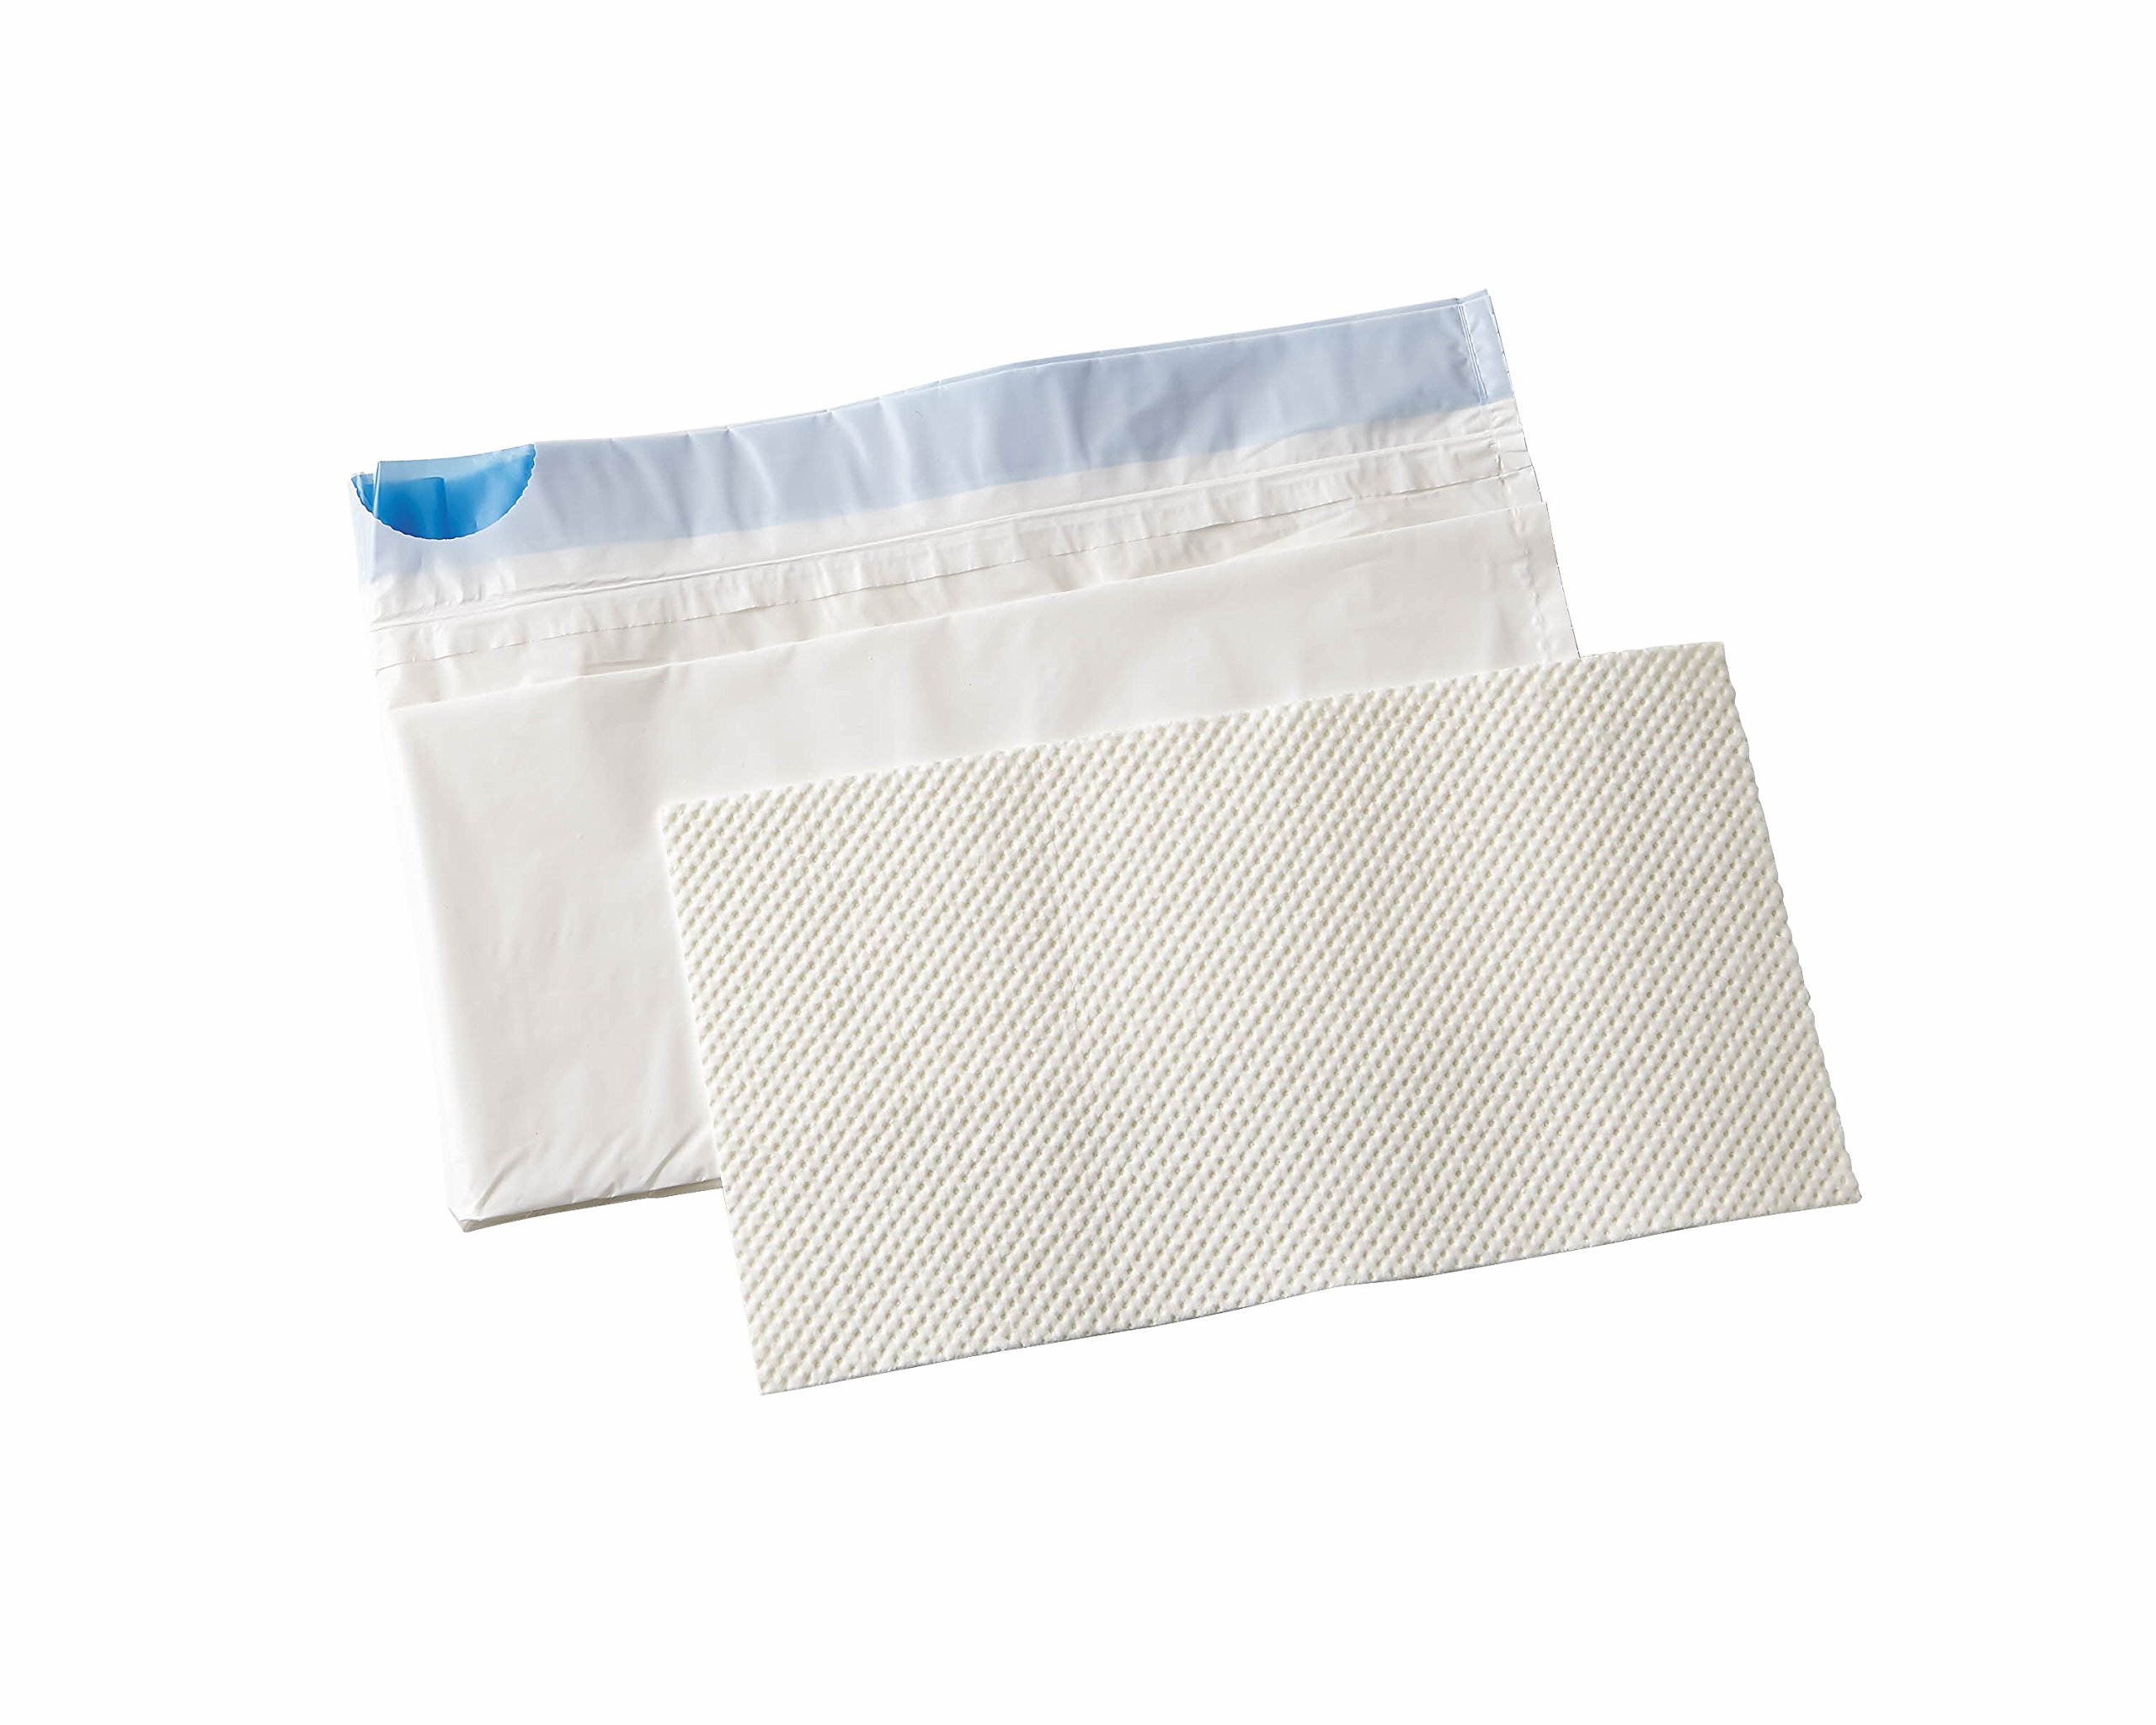 Medline Commode Liners with Absorbent Pad case of 72